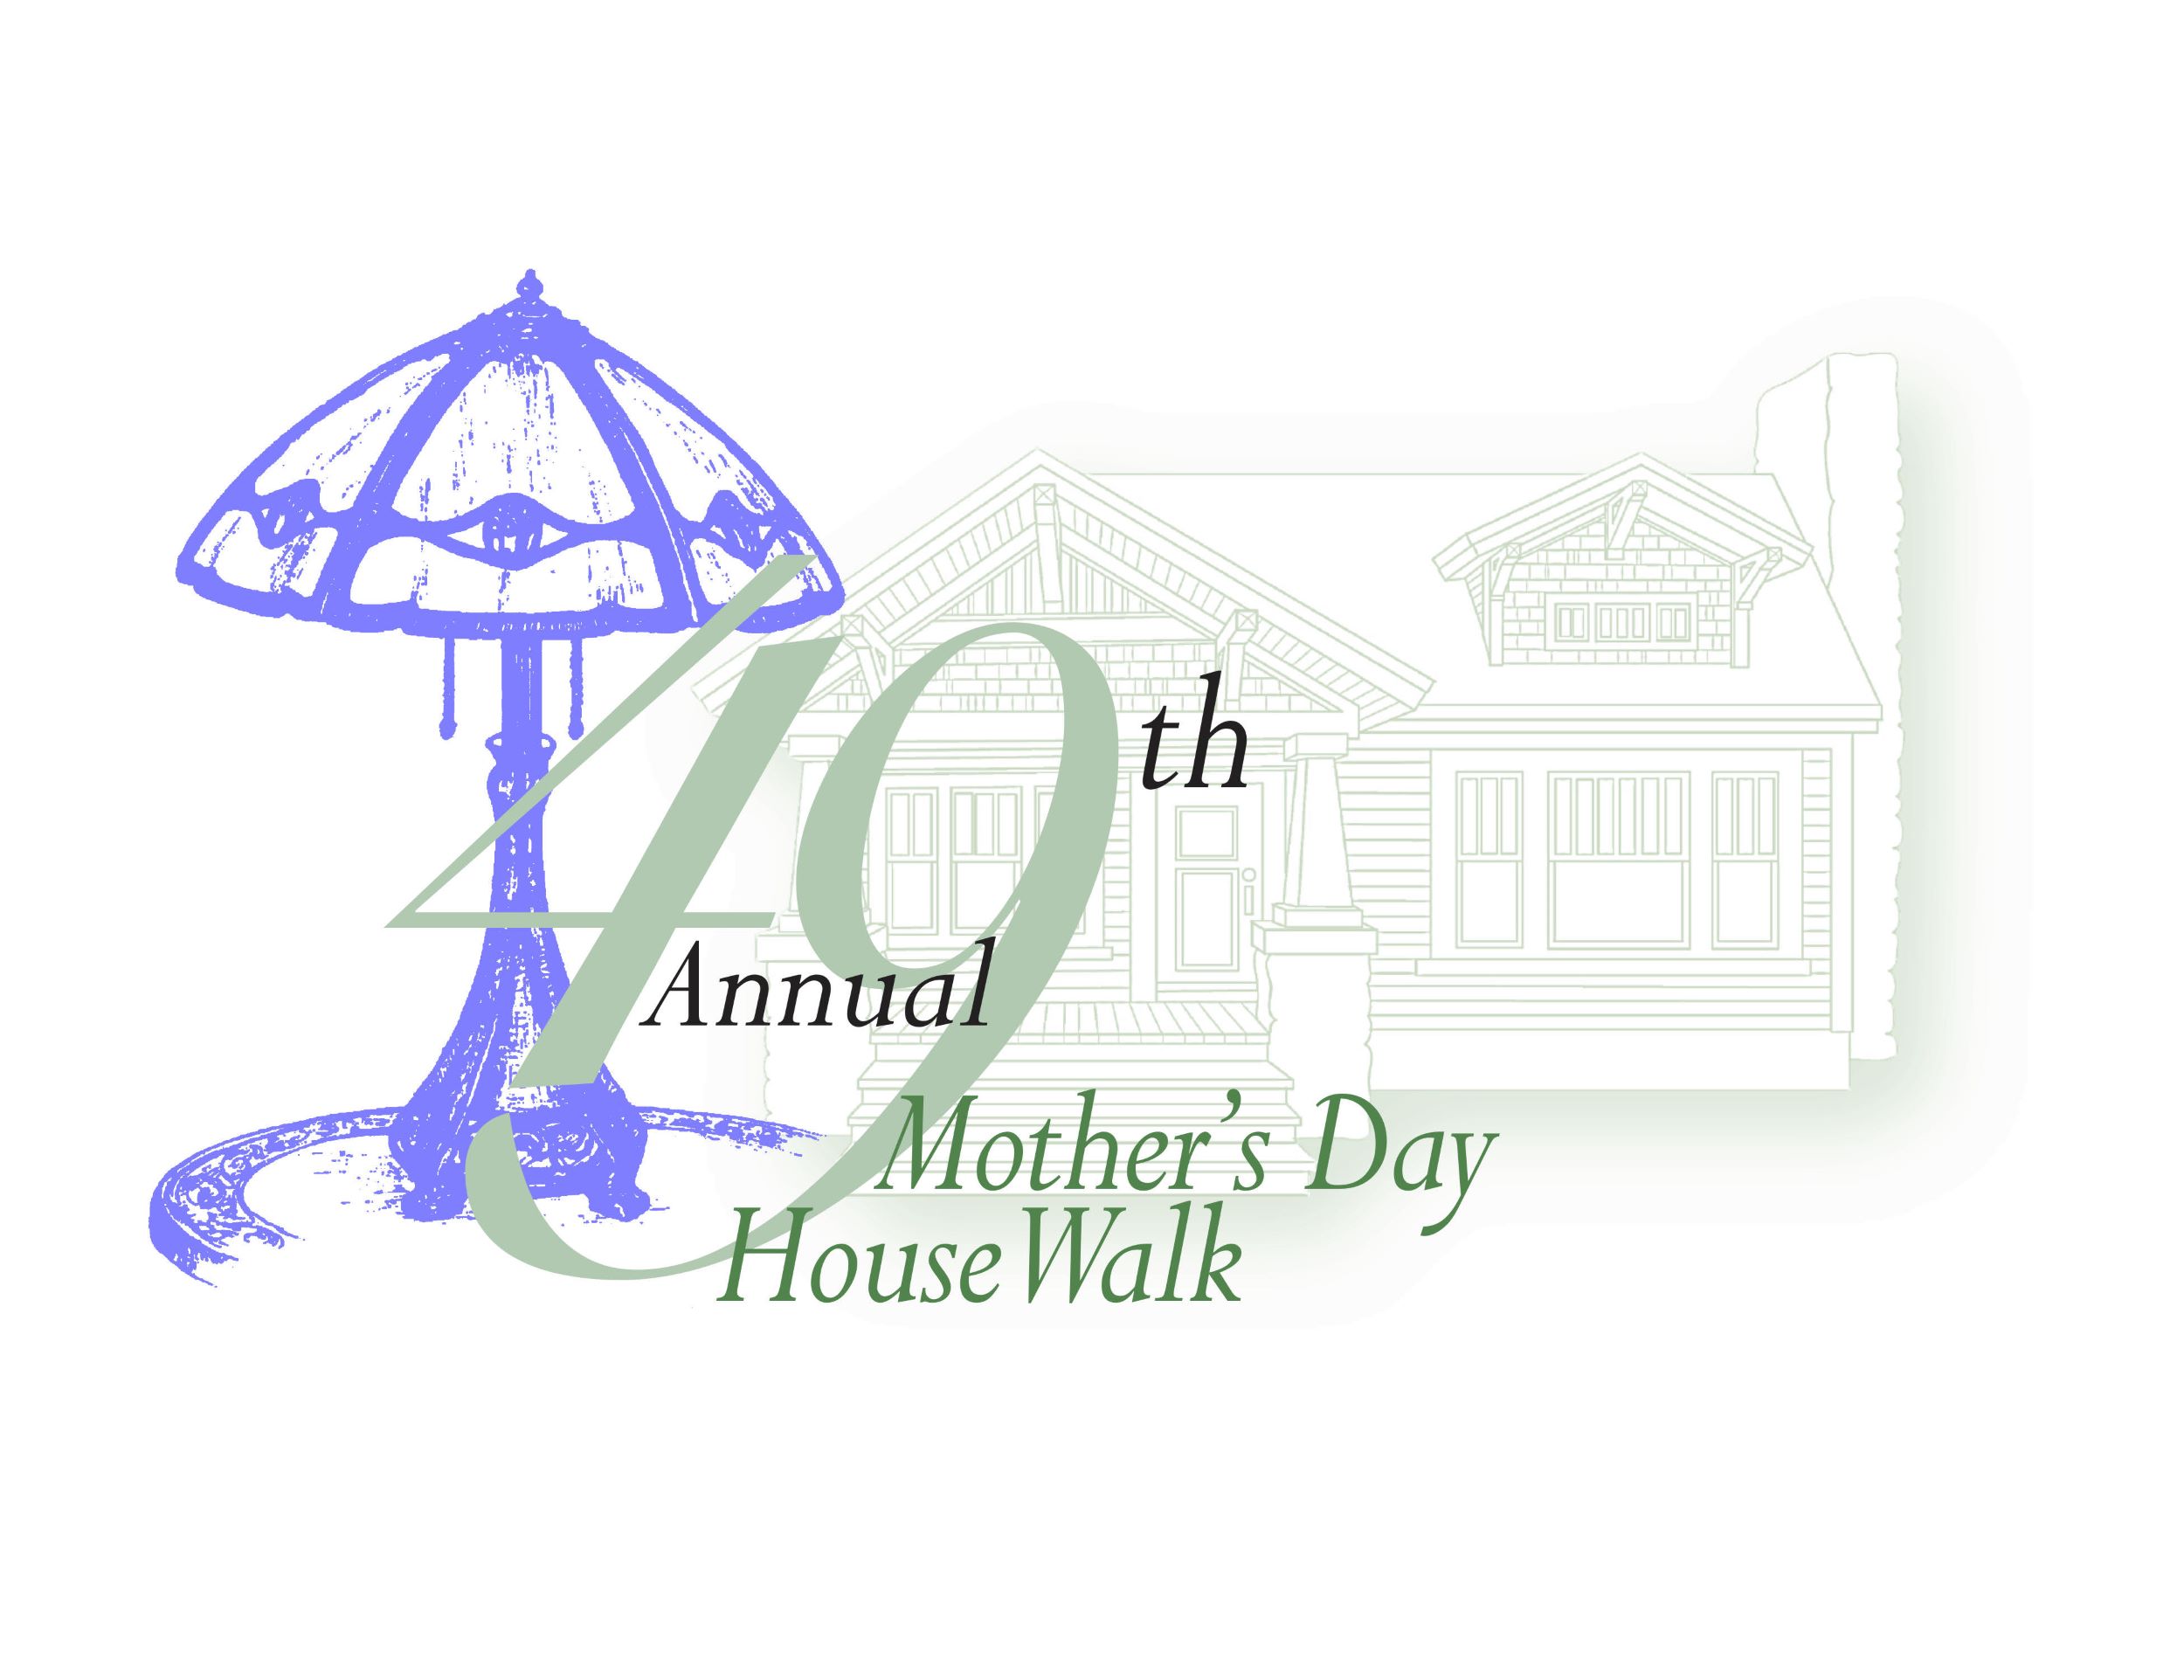 House Walk Logo, alternates between the words House Walk to the words Mother's Day